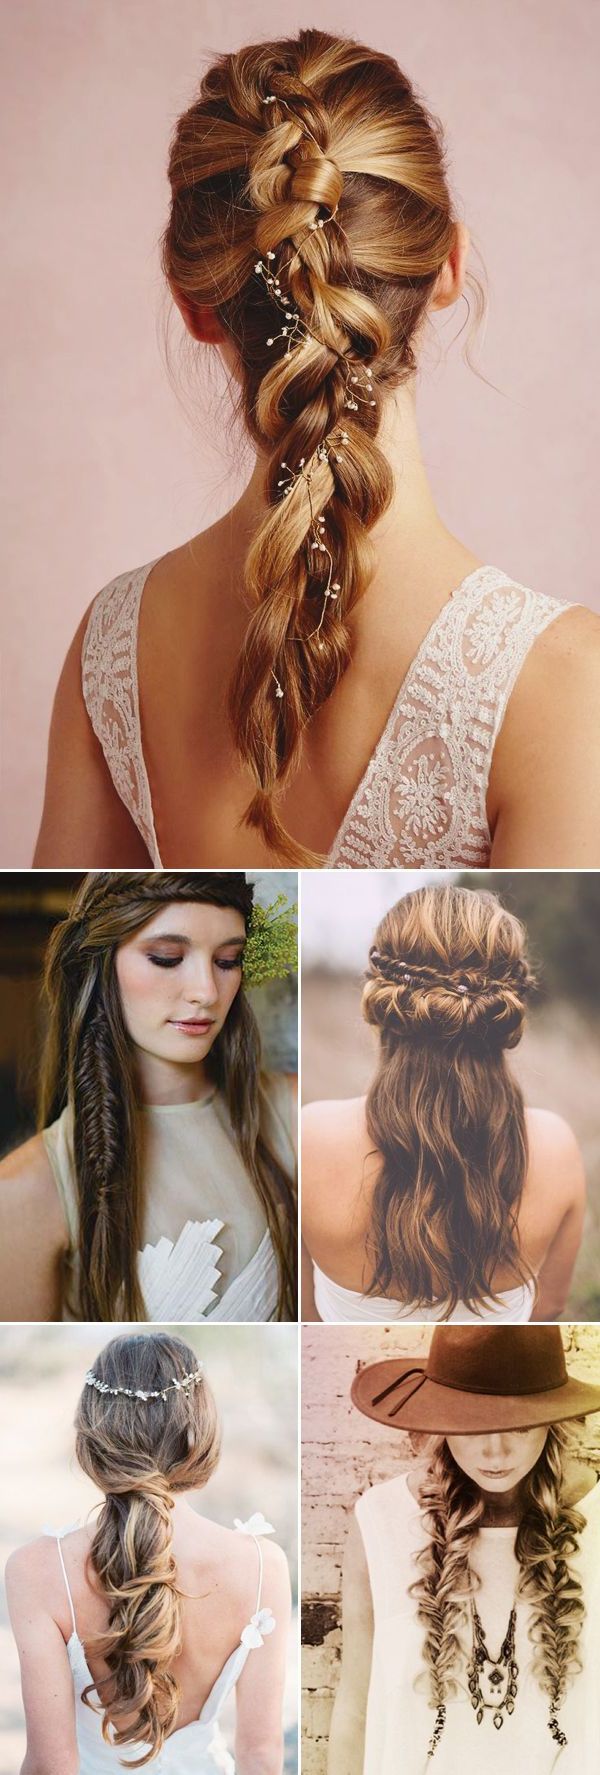 26 Boho Hairstyles With Braids – Bun Updos & Other Great New Throughout Best And Newest Renaissance Micro Braid Hairstyles (View 8 of 20)